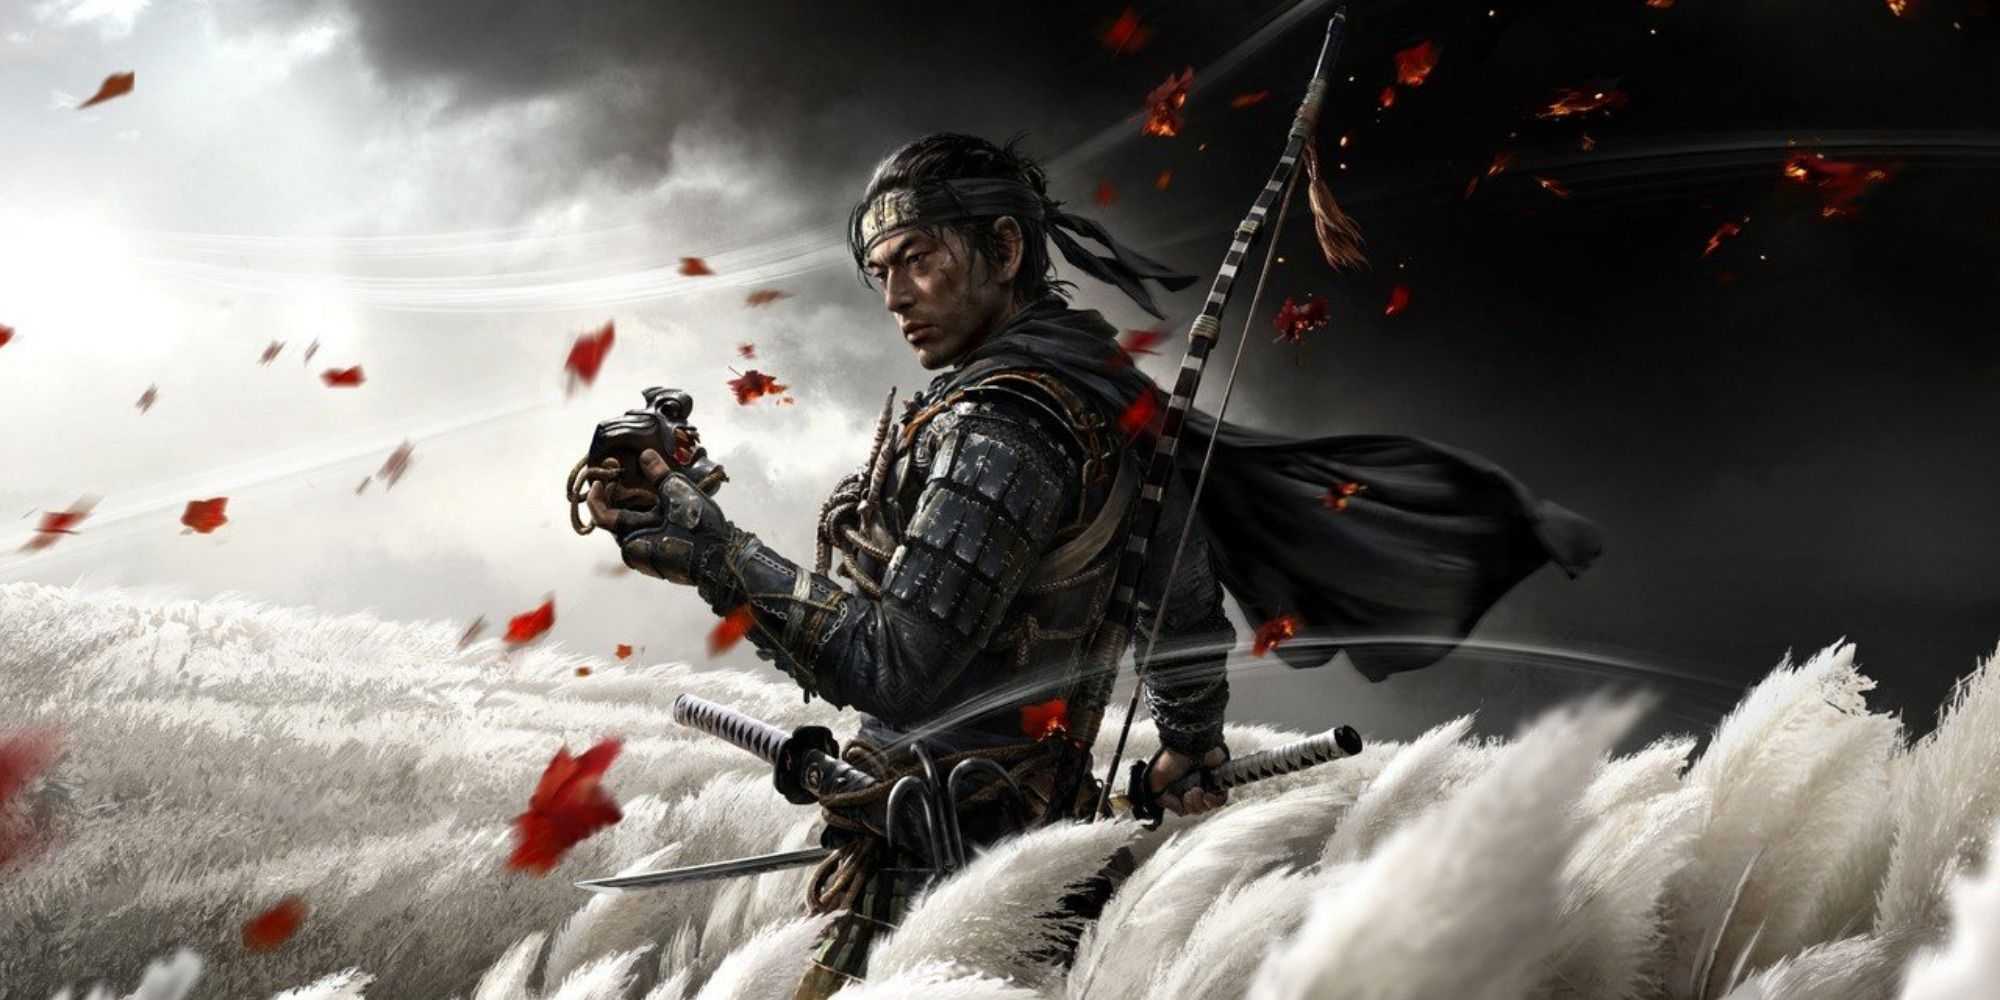 The Last Thing Ghost Of Tsushima Needs Is A Director’s Cut